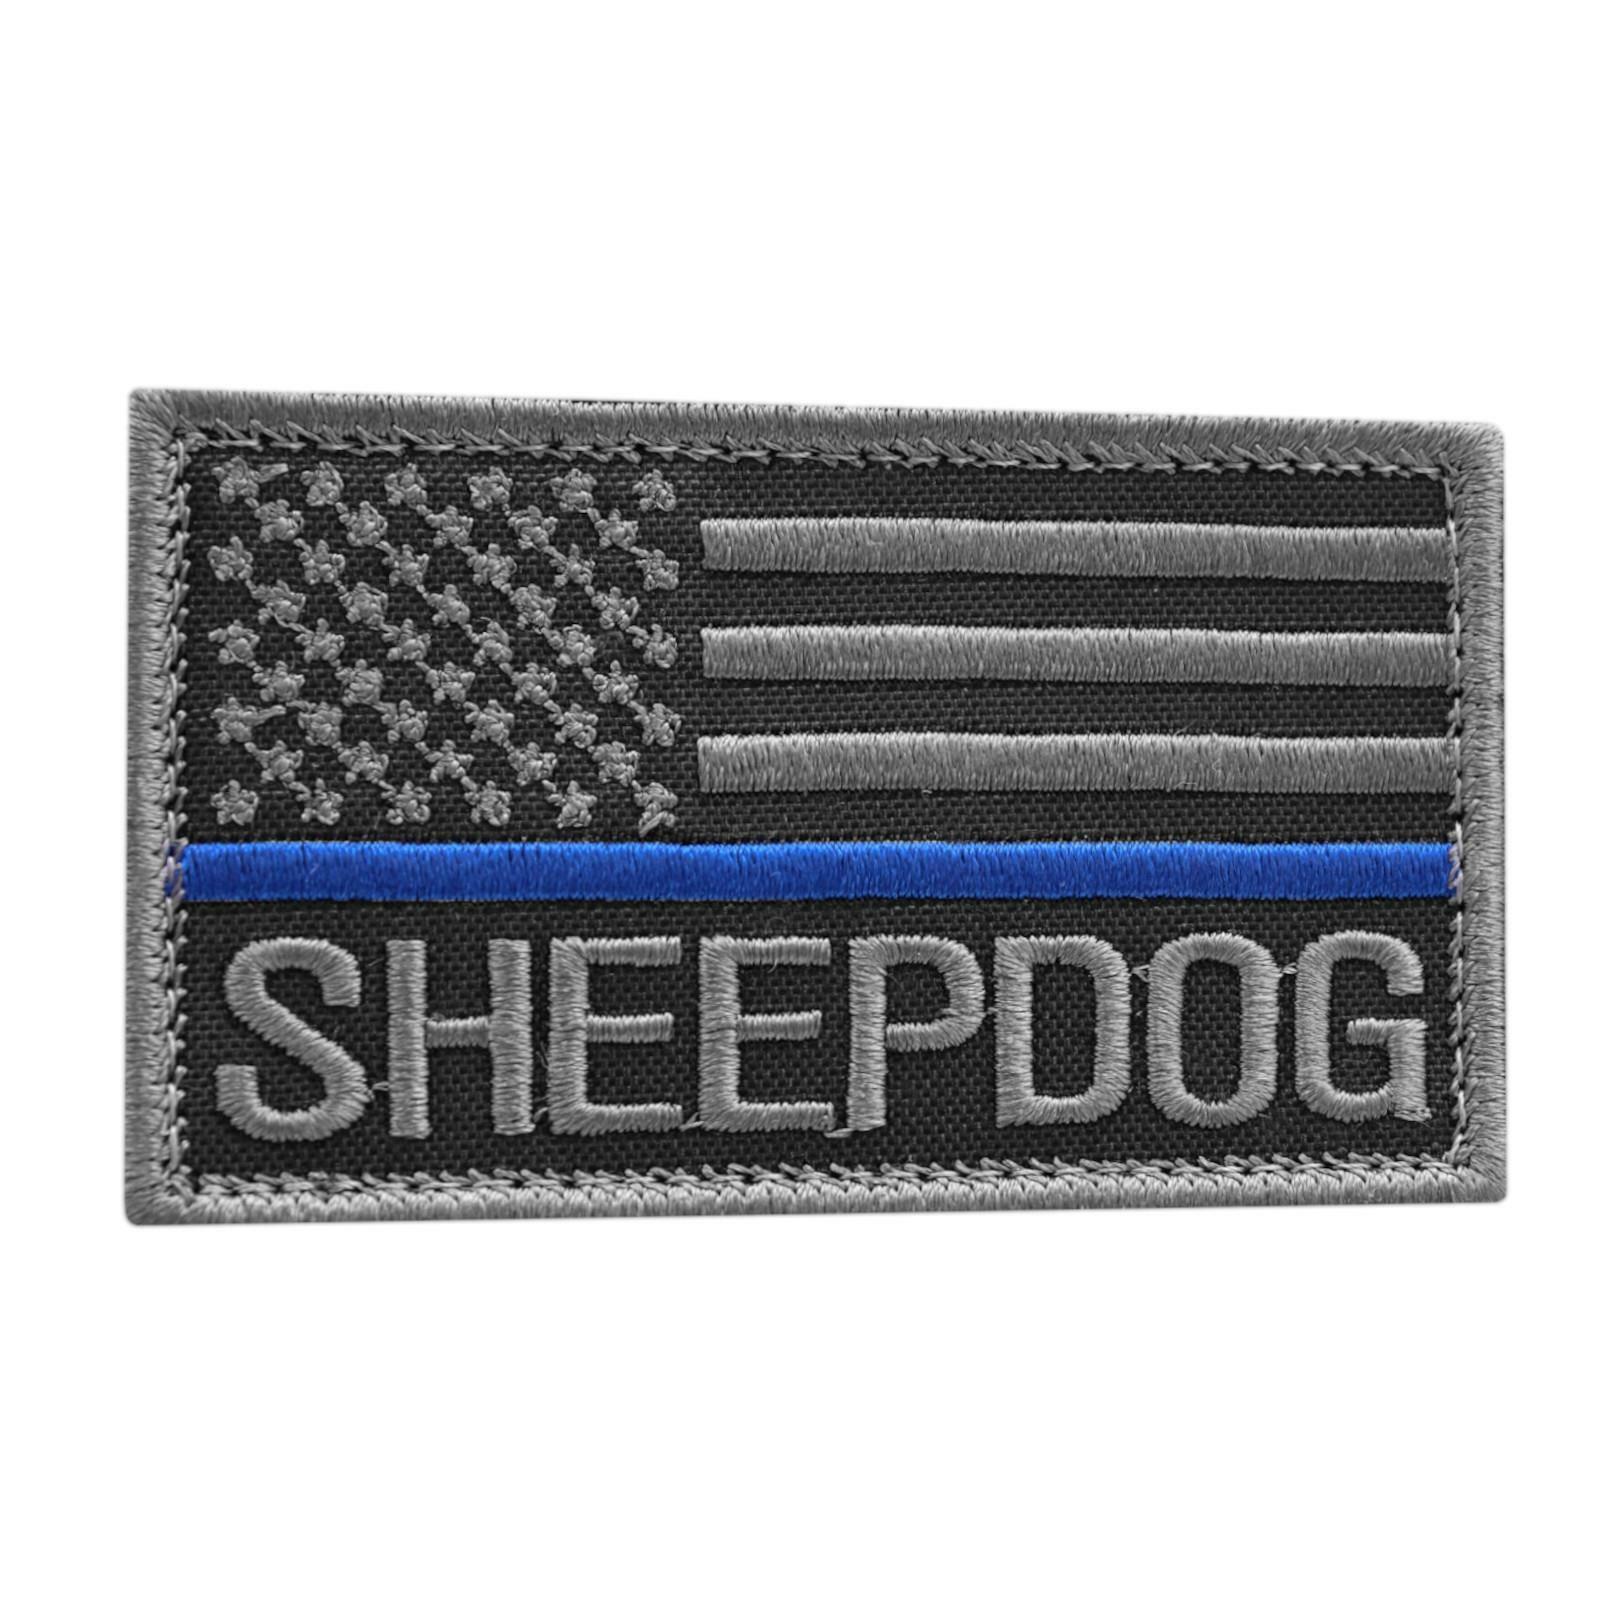 american sheepdog thin blue line subdued police sheriff agent tactical cap patch